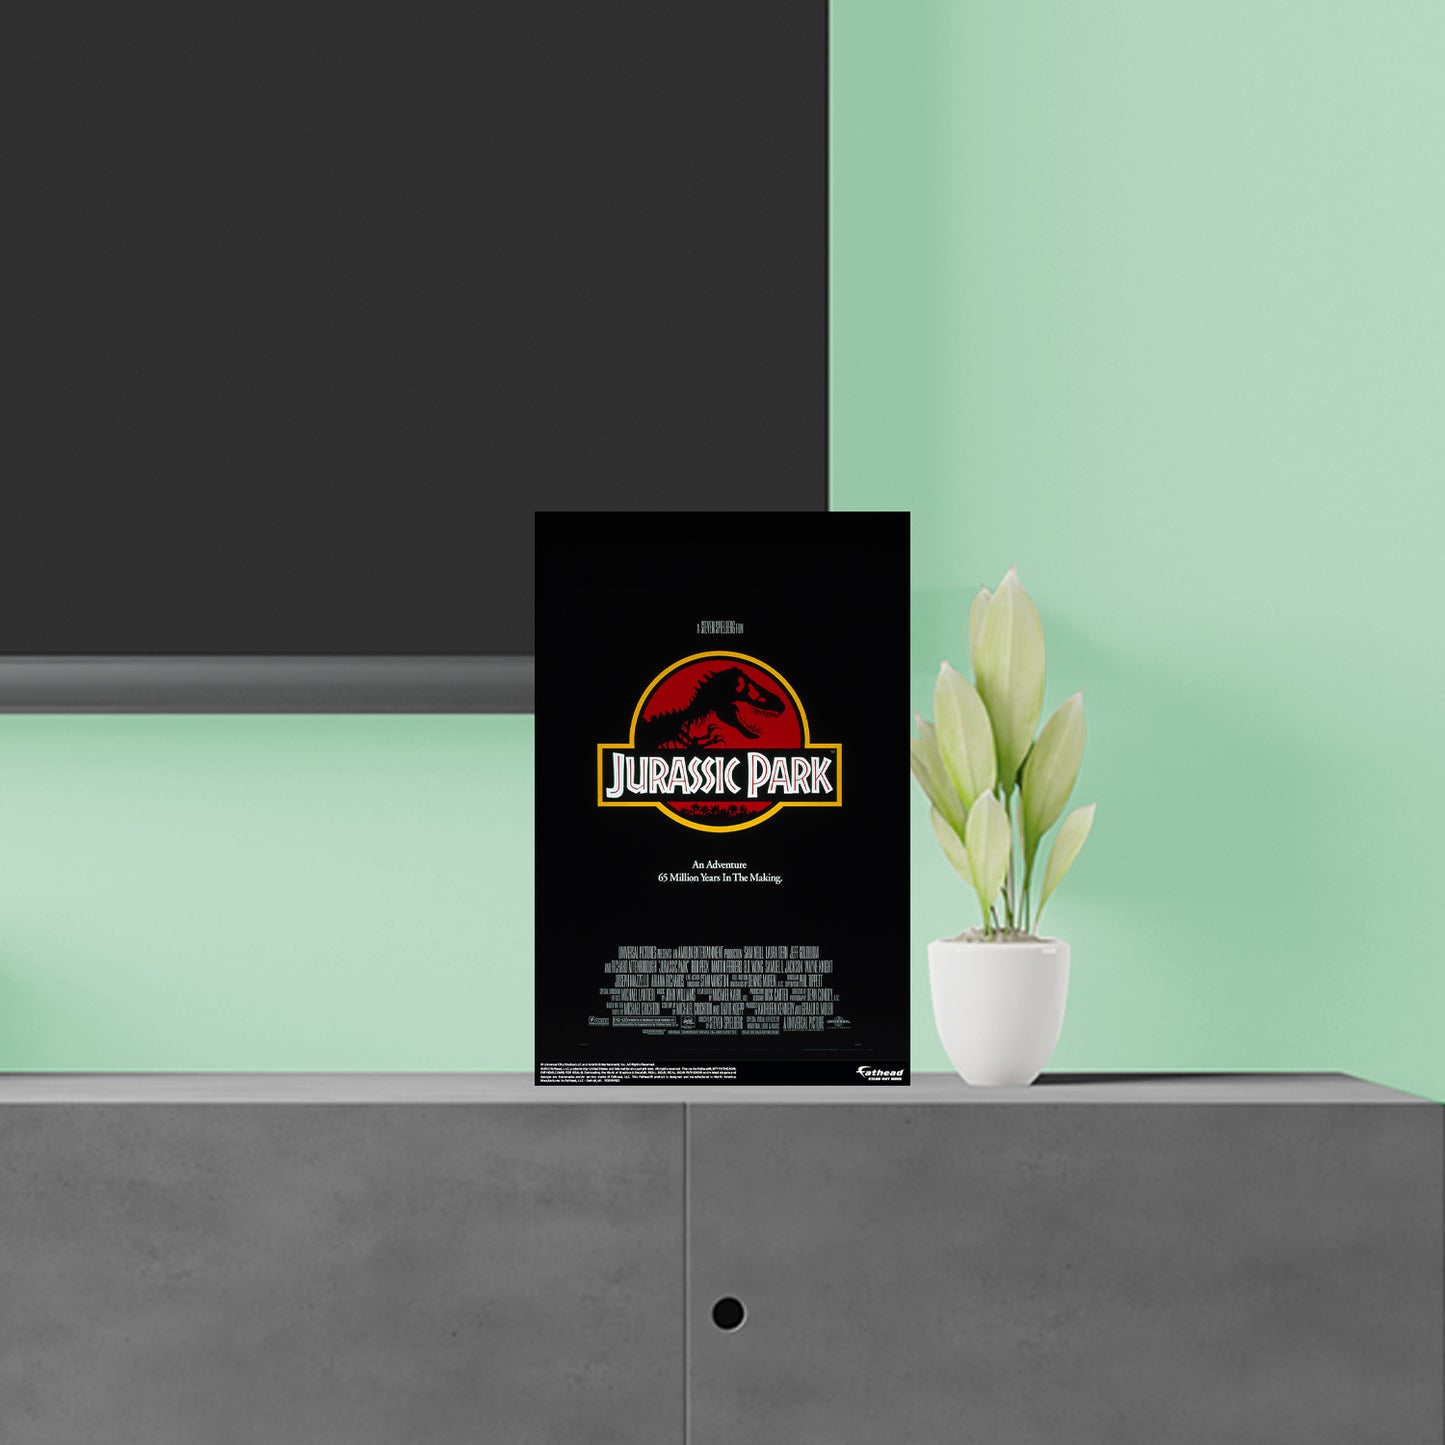 Jurassic Park: Jurassic Park Poster Mini Cardstock Cutout - Officially Licensed NBC Universal Stand Out